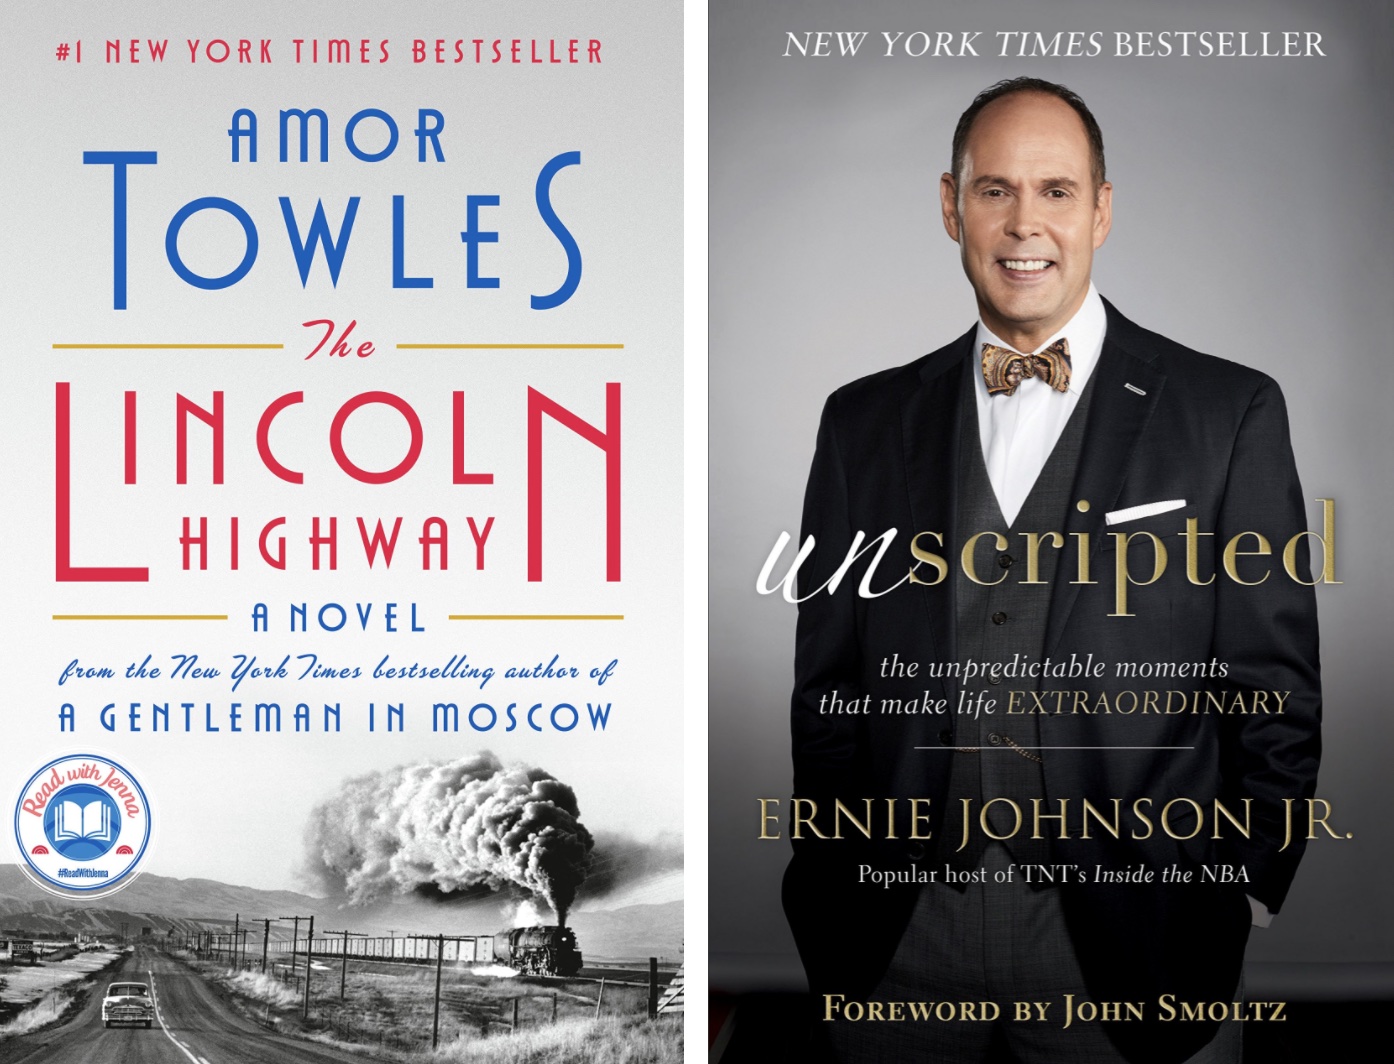 two GOOD books…maybe last-minute gift ideas?